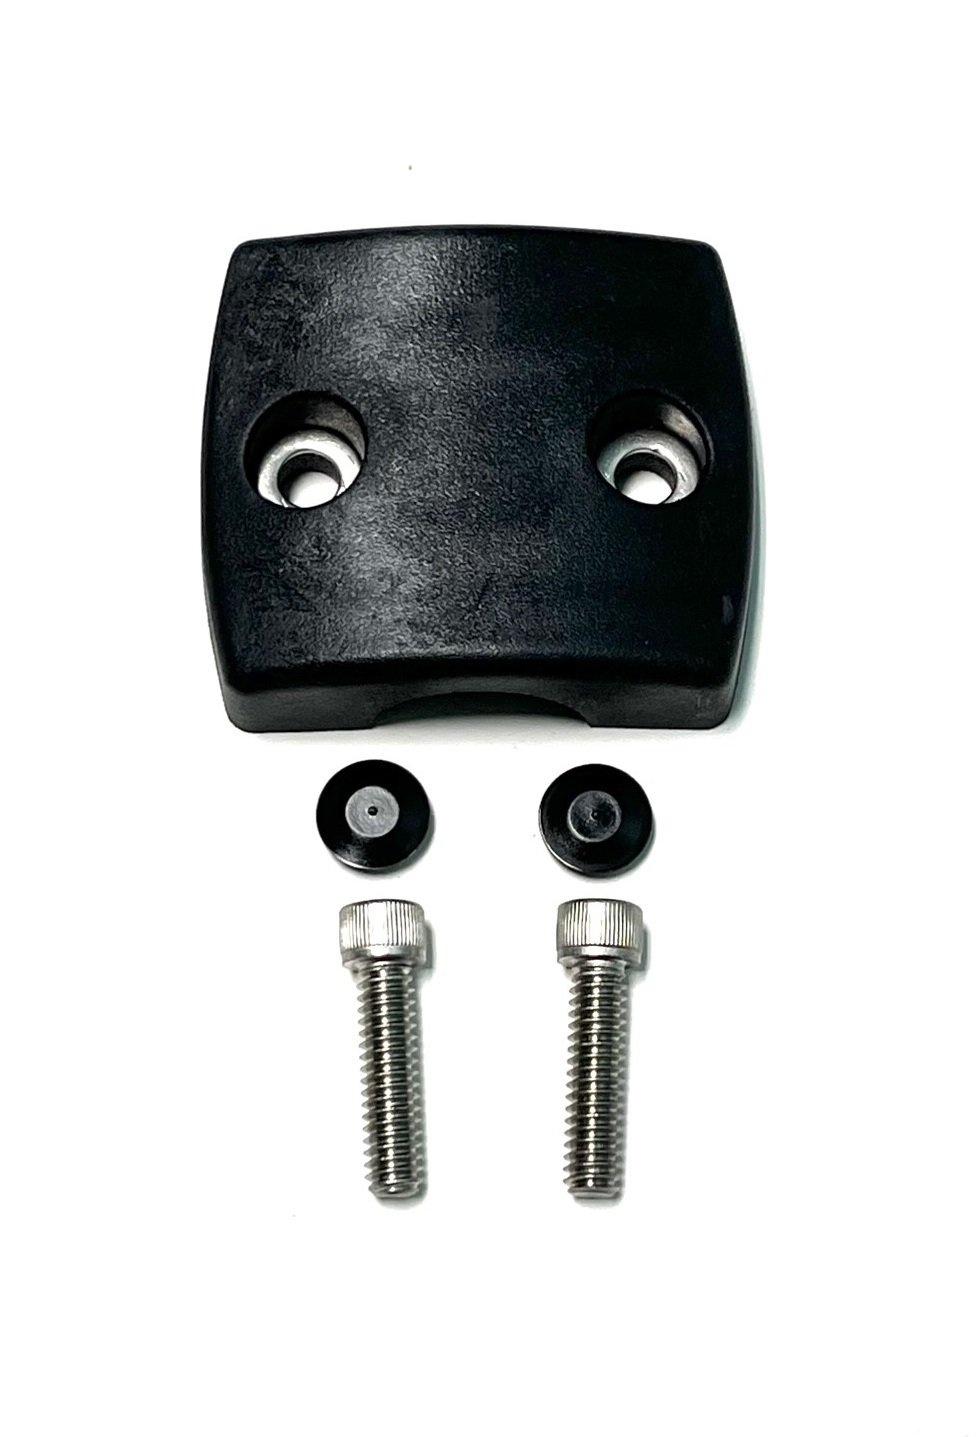 Open-View Mirror Head Mounting Clamp Kit 